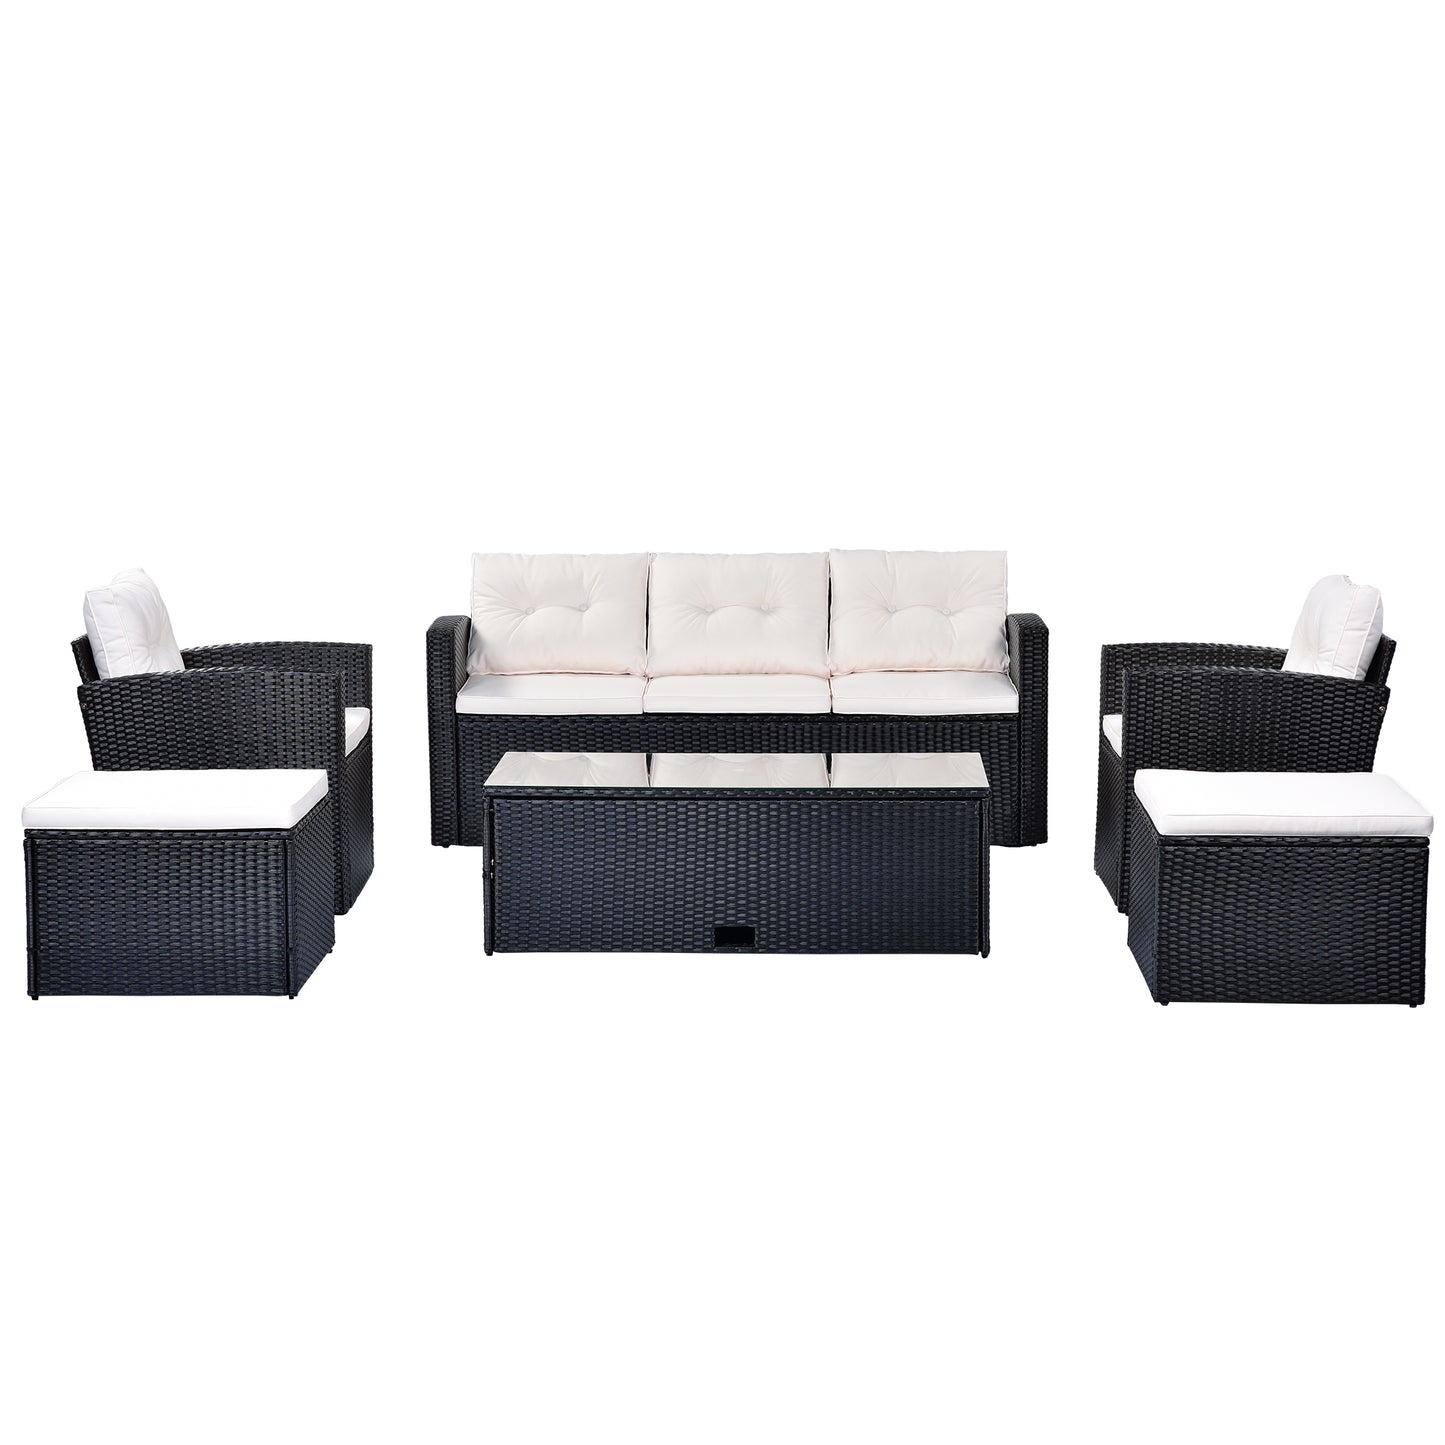 GO 6-piece All-Weather Wicker PE rattan Patio Outdoor Dining Conversation Sectional Set with coffee table, wicker sofas, ottomans, removable cushions (Black wicker, Beige cushion)